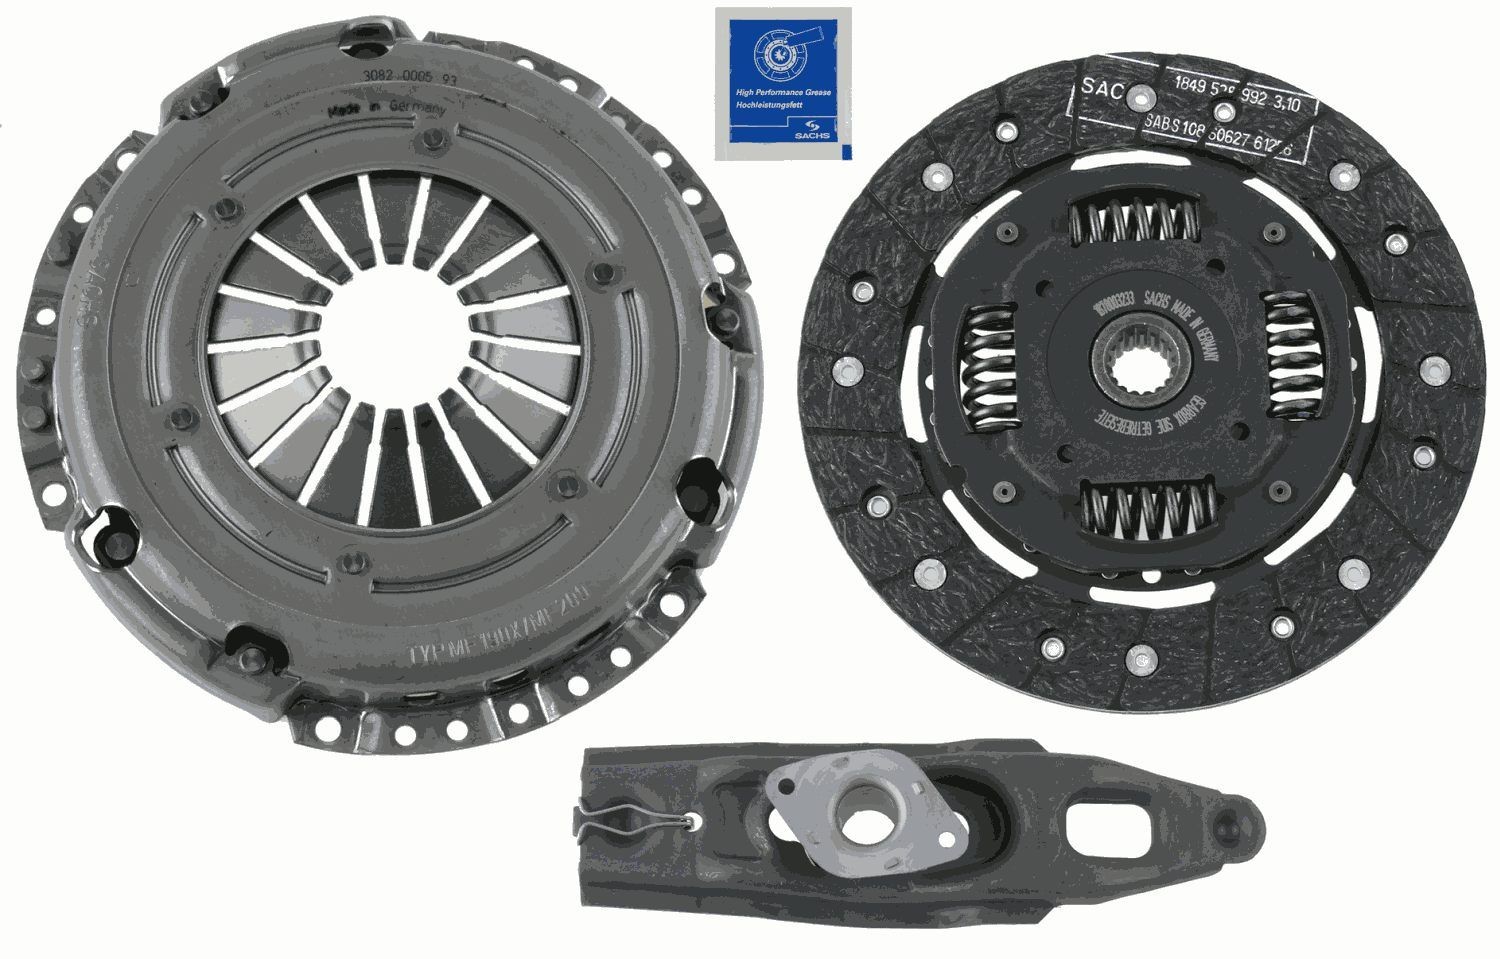 Smart Clutch kit SACHS 3000 951 040 at a good price